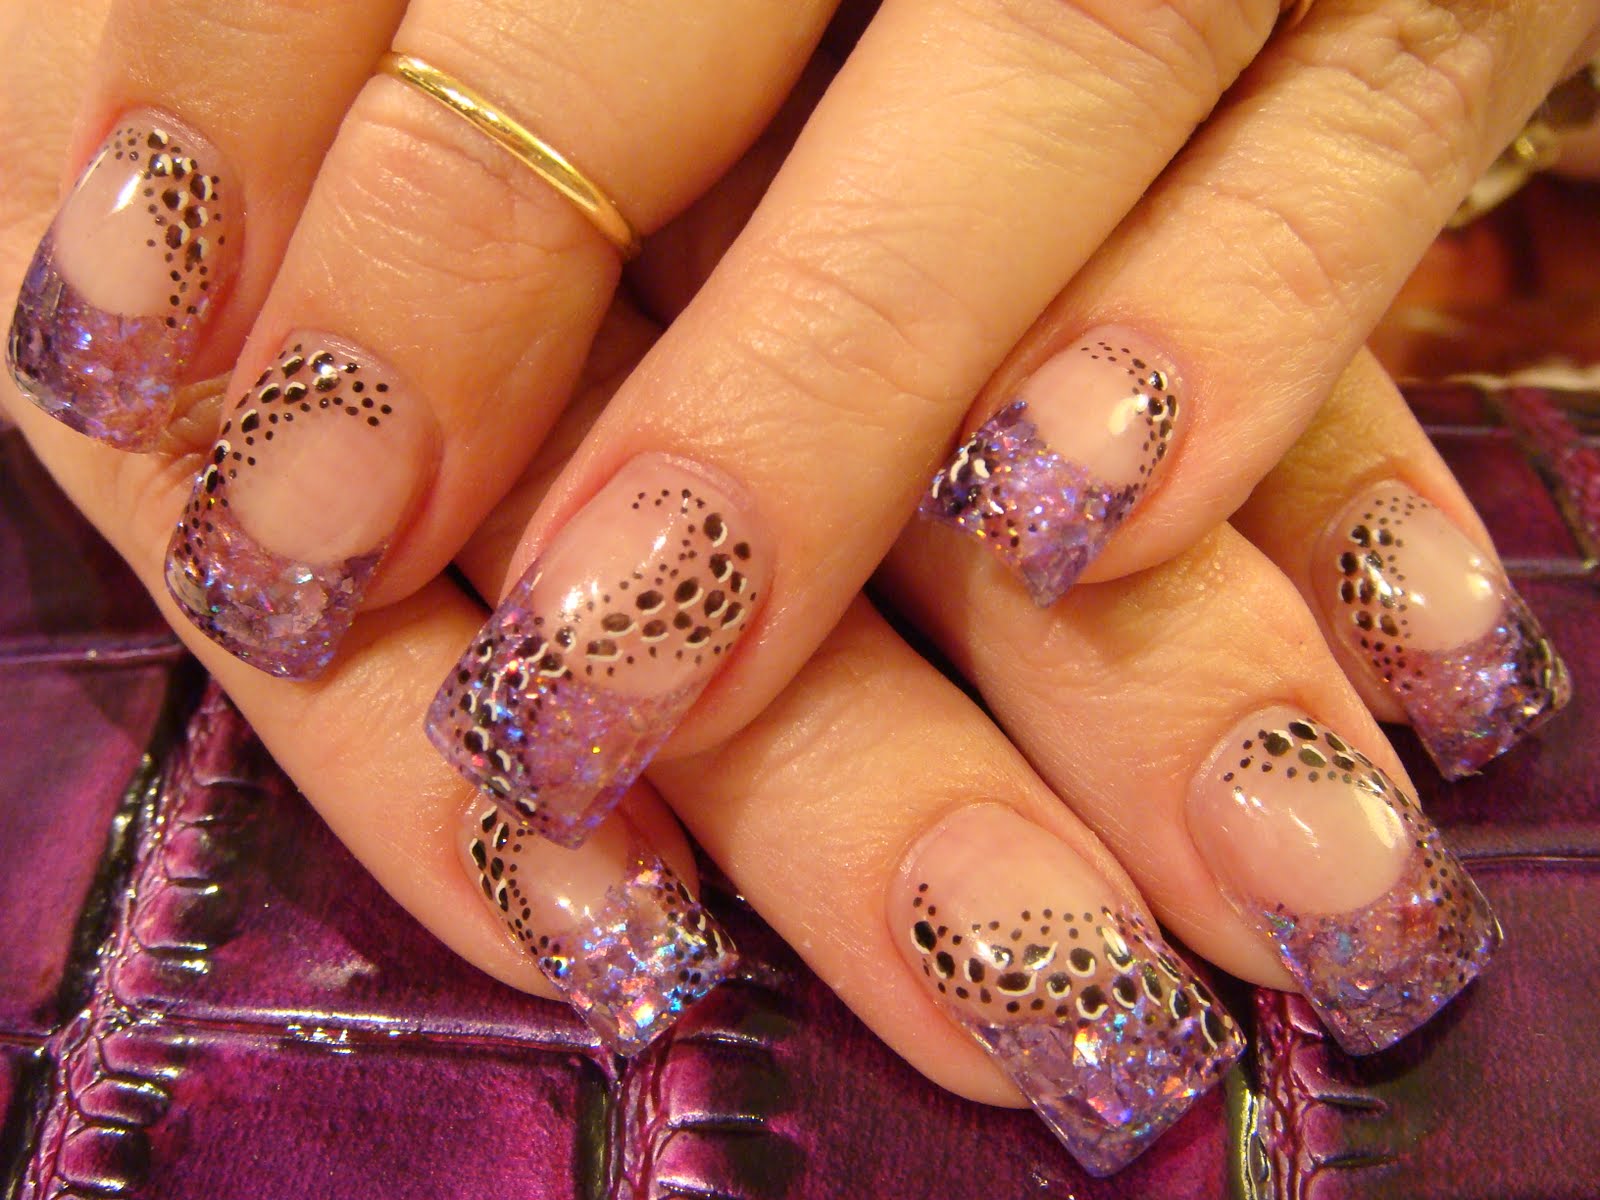 inspired by a Young Nails mentor Christie. I used purple acrylic and